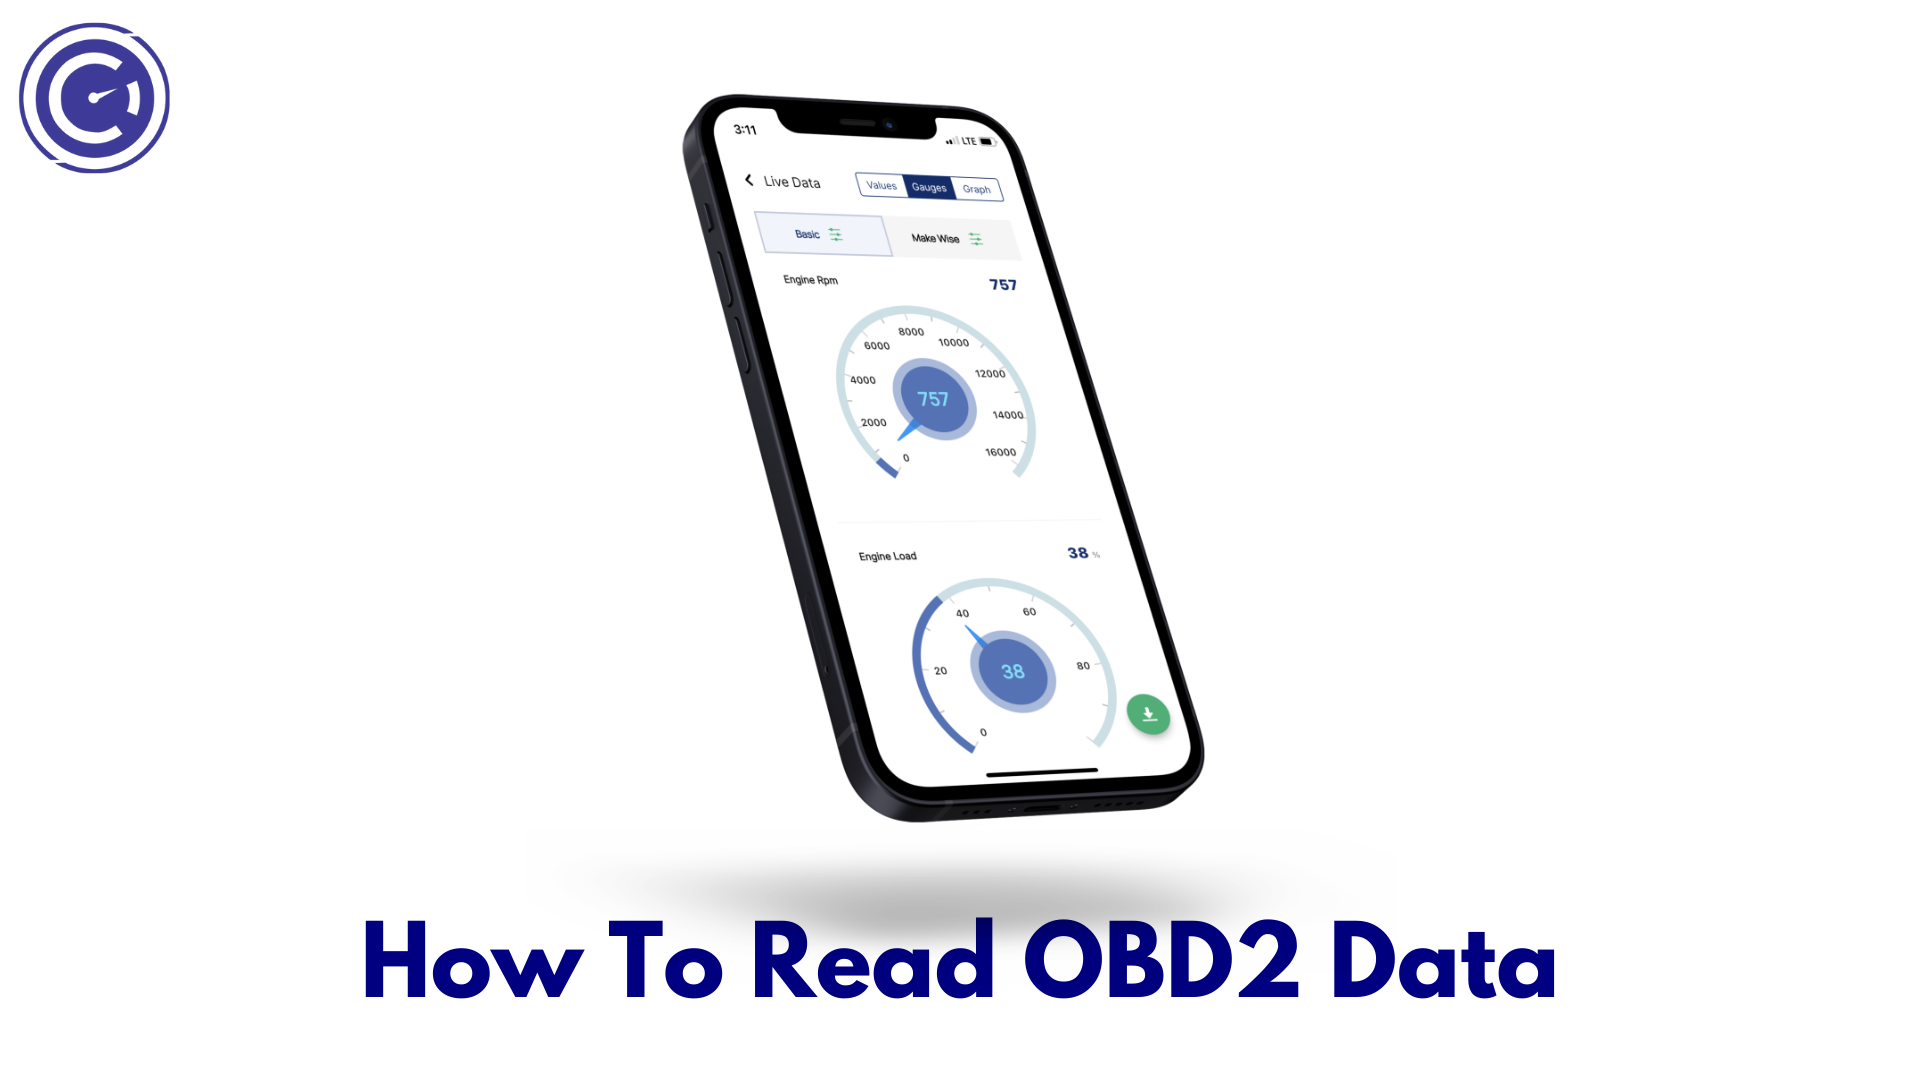 How To Read OBD2 Data